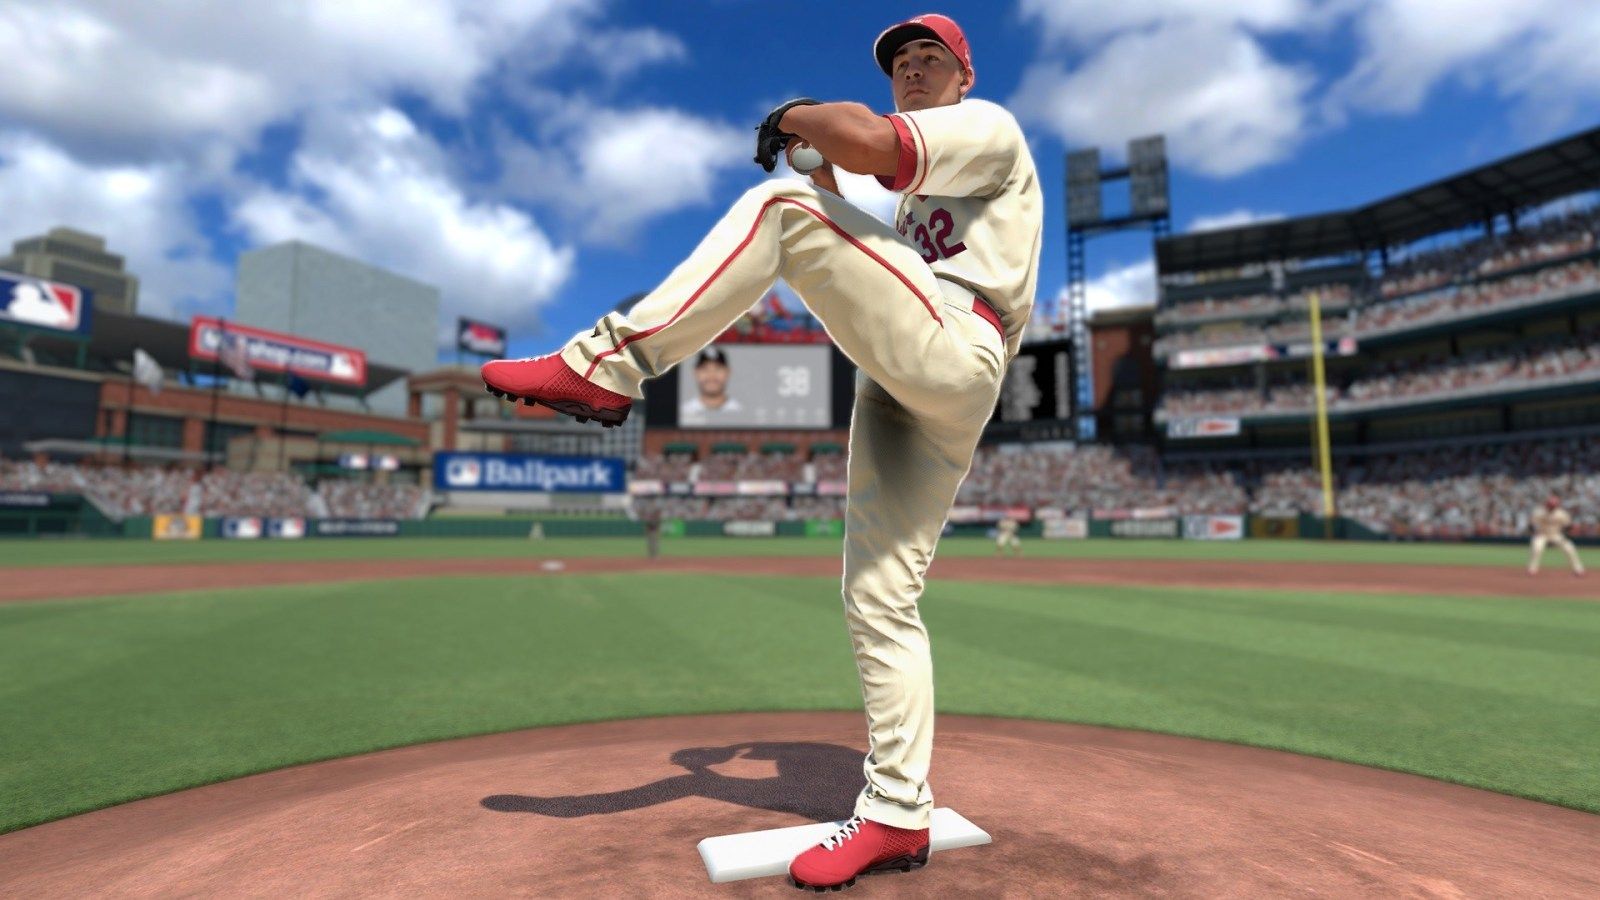 RBI Baseball 19 Review A Shallow and Frustrating Strike Out